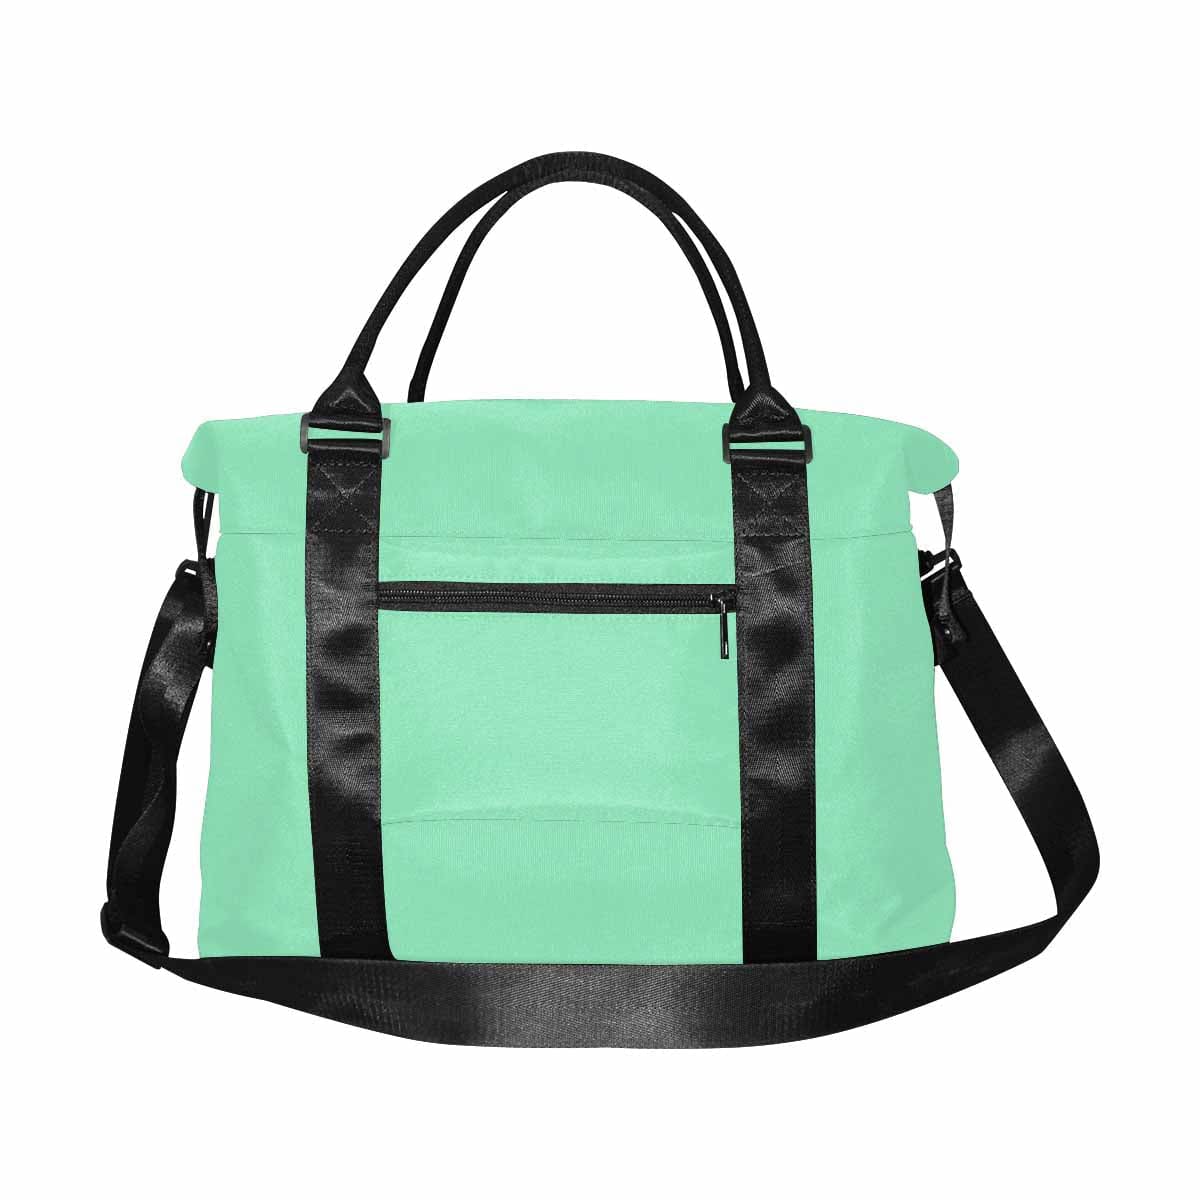 Travel Bag Seafoam Green Canvas Carry On - Bags | Travel Bags | Canvas Carry